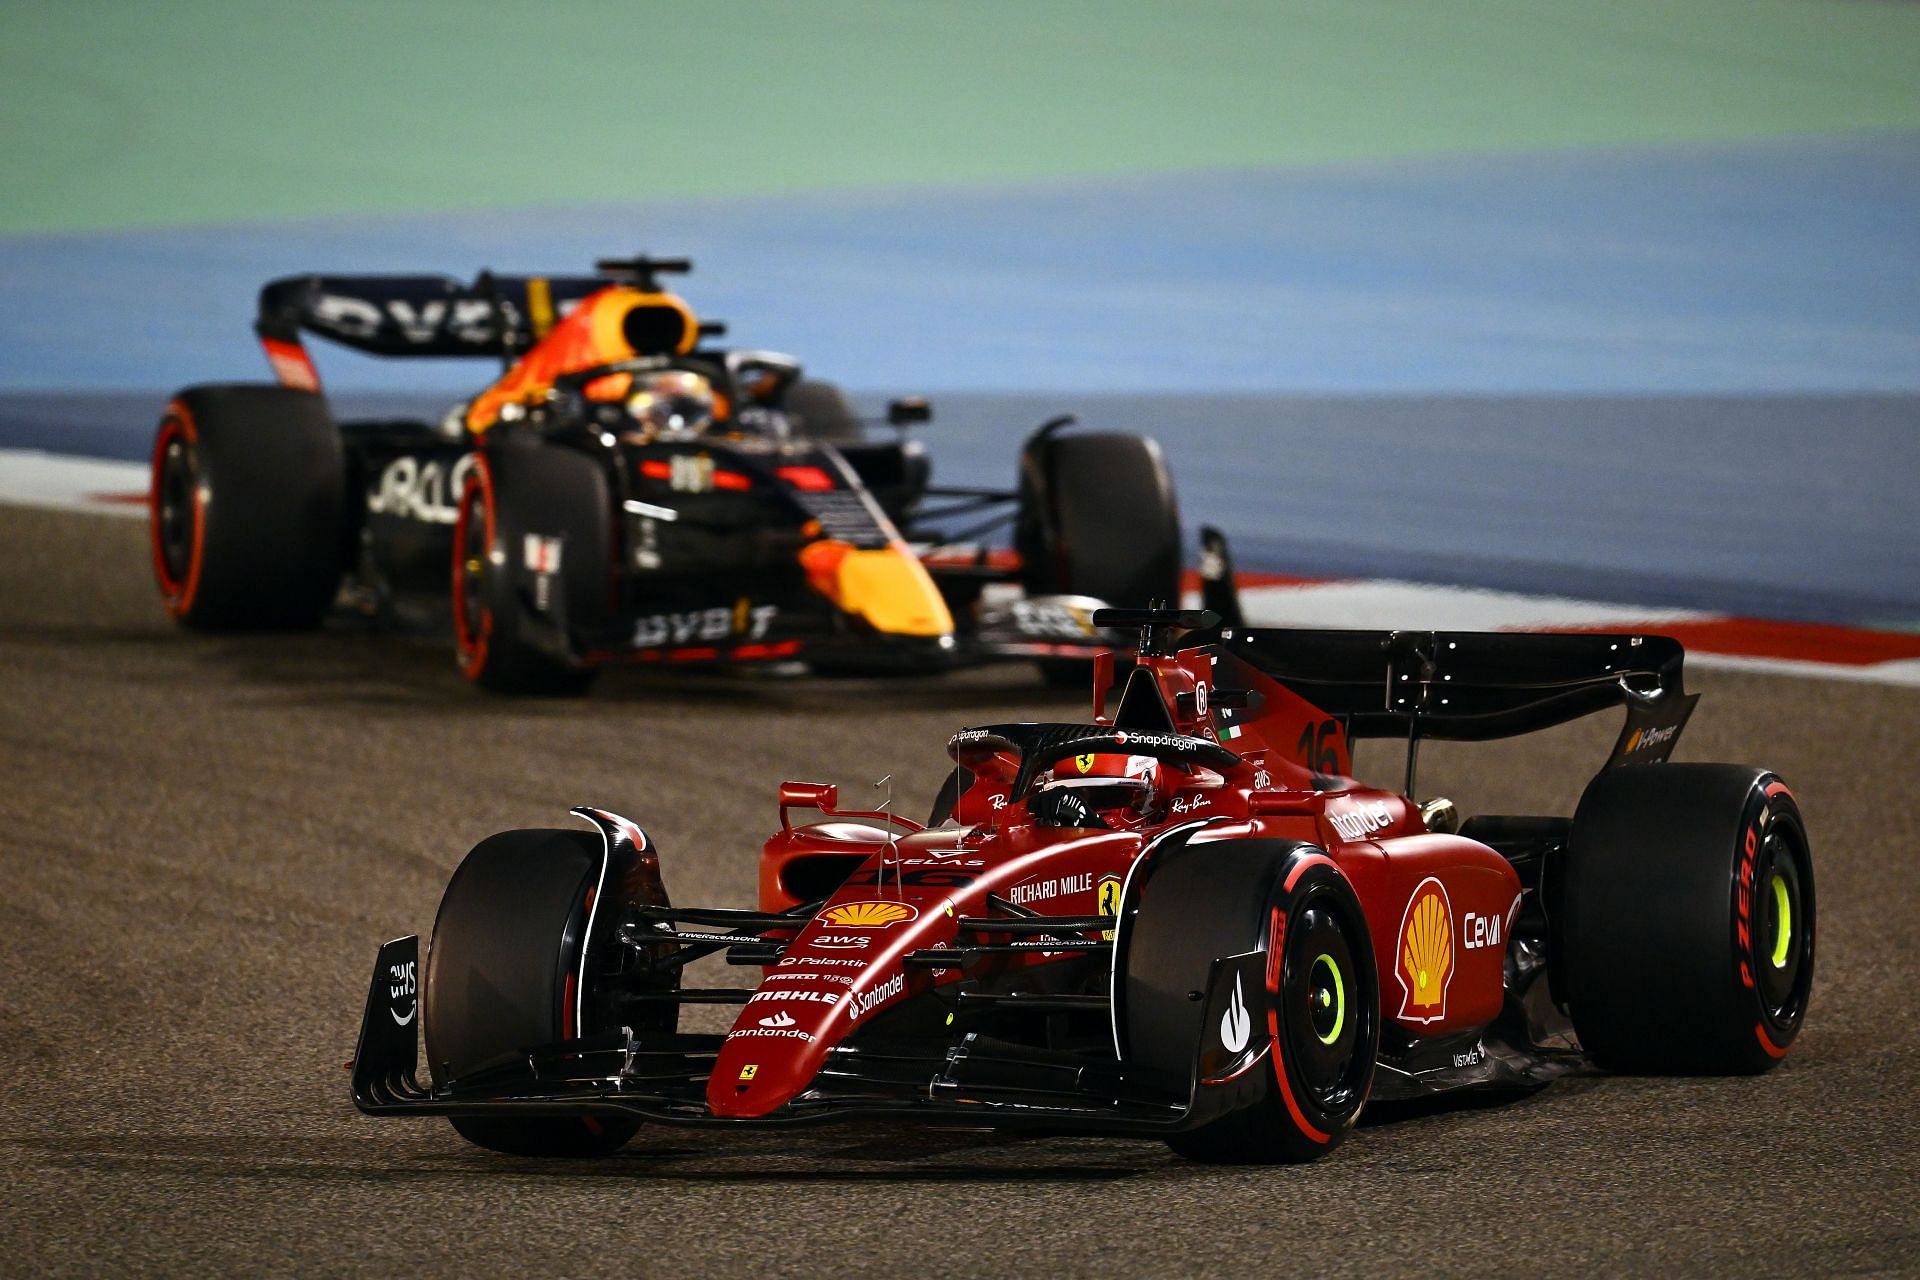 Ferrari&#039;s Charles Leclerc (foreground) and Red Bull&#039;s Max Verstappen in action during the 2022 F1 Bahrain GP. (Photo by Clive Mason/Getty Images)